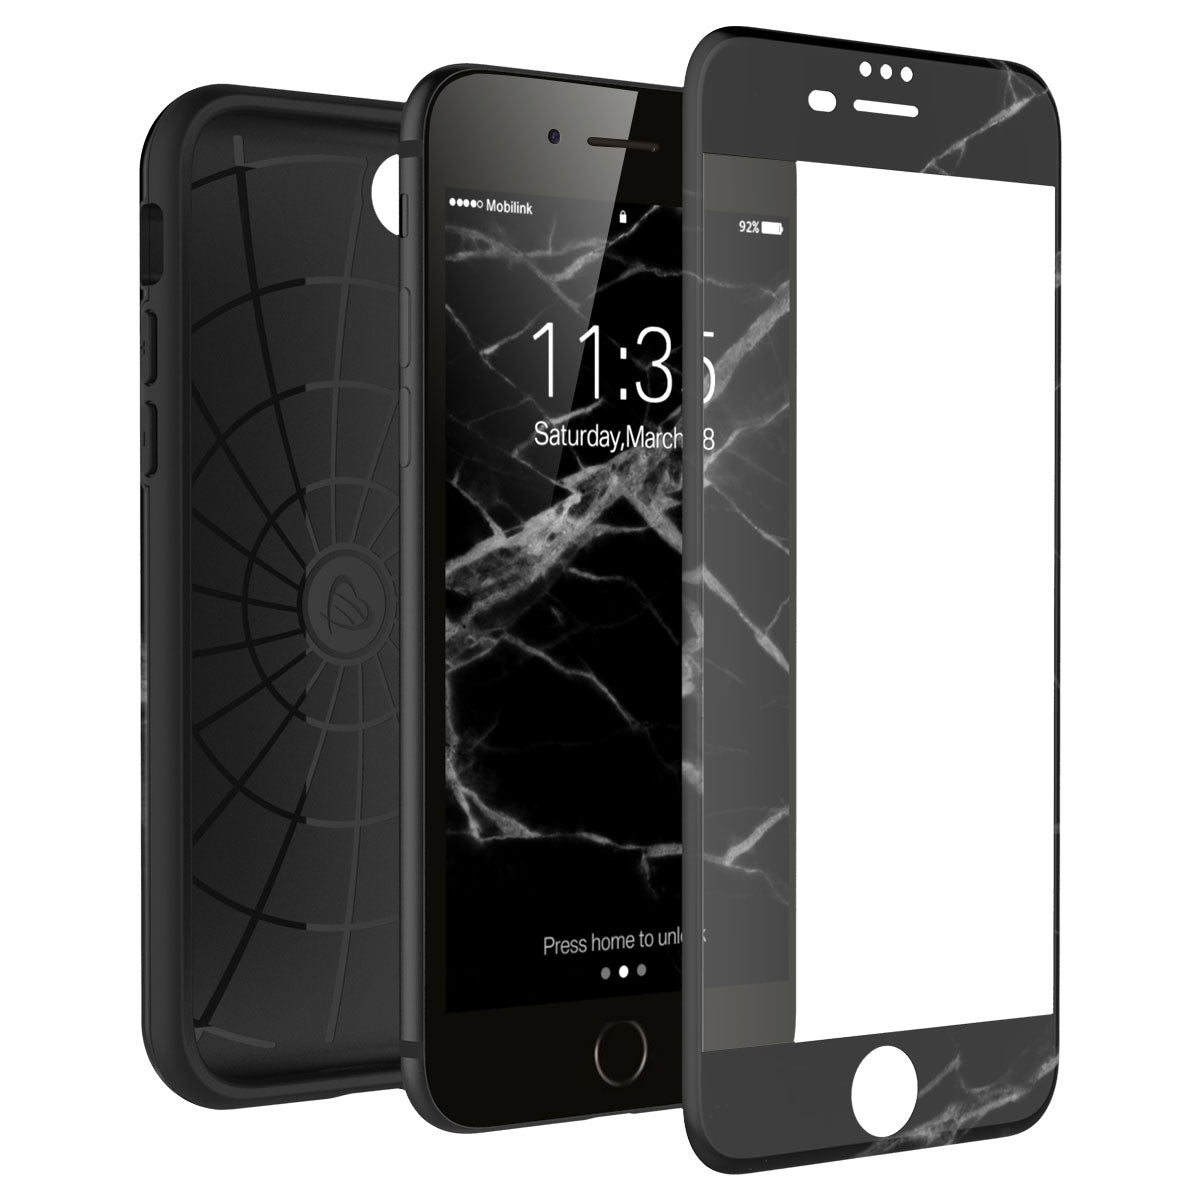 LUVVITT ARTOLOGY Case and Tempered Glass Set for iPhone 7/8 Plus - Bundle P013